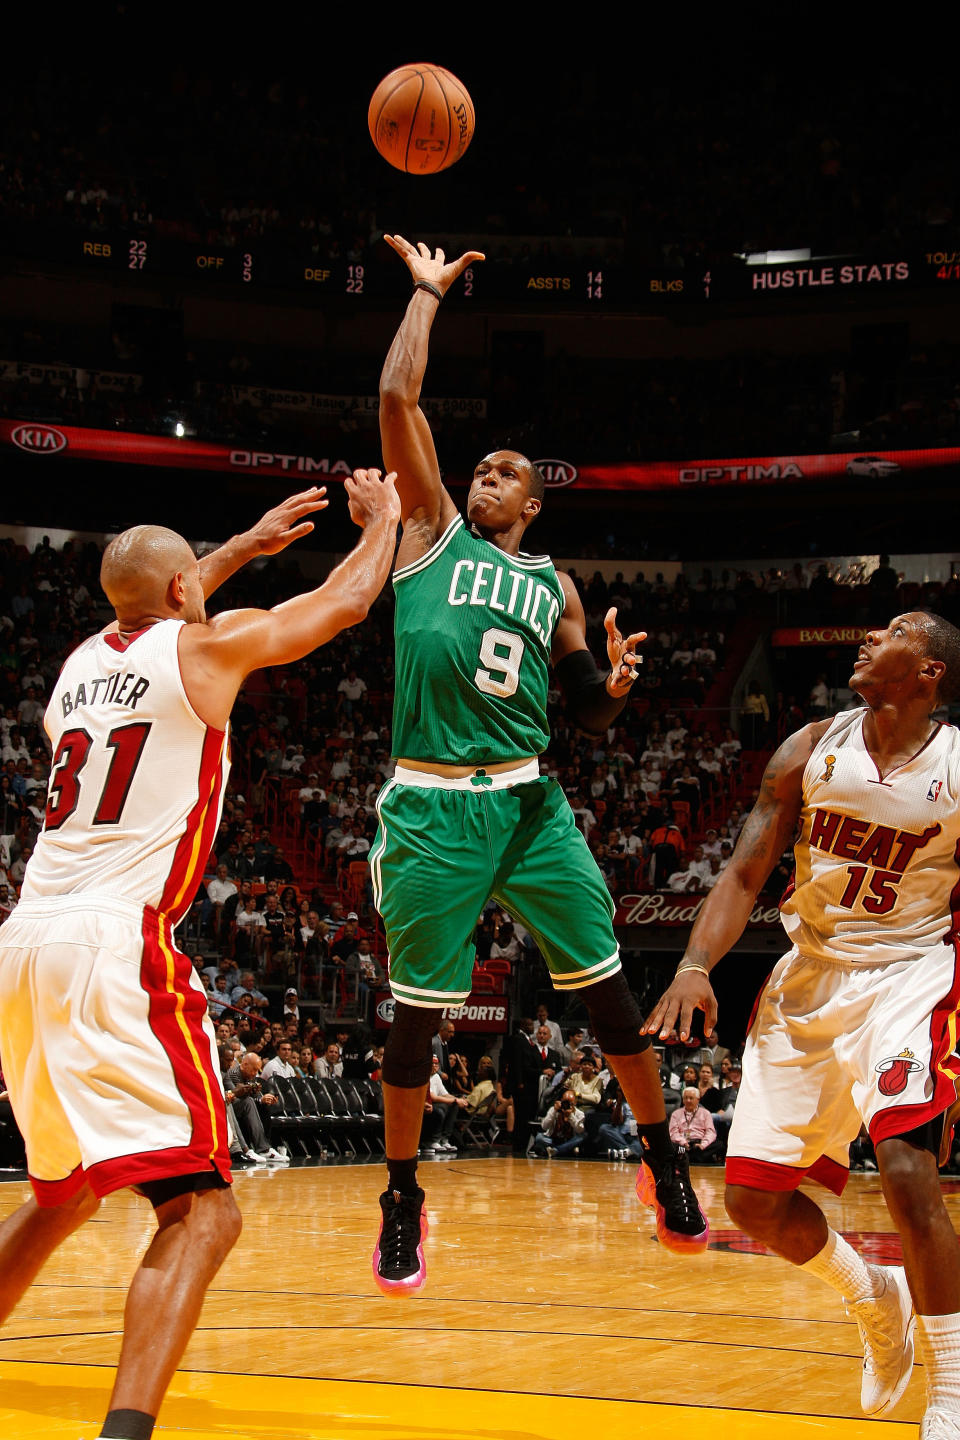 MIAMI, FL - OCTOBER 30: Rajon Rondo #9 of the Boston Celtics shoots against (L-R) Shane Battier #31 and Mario Chalmers #15 of the Miami Heat during the NBA game on October 30, 2012 at American Airlines Arena in Miami, Florida. NOTE TO USER: User expressly acknowledges and agrees that, by downloading and/or using this photograph, user is consenting to the terms and conditions of the Getty Images License Agreement. Mandatory copyright notice: Copyright NBAE 2012 (Photo by Issac Baldizon/NBAE via Getty Images)